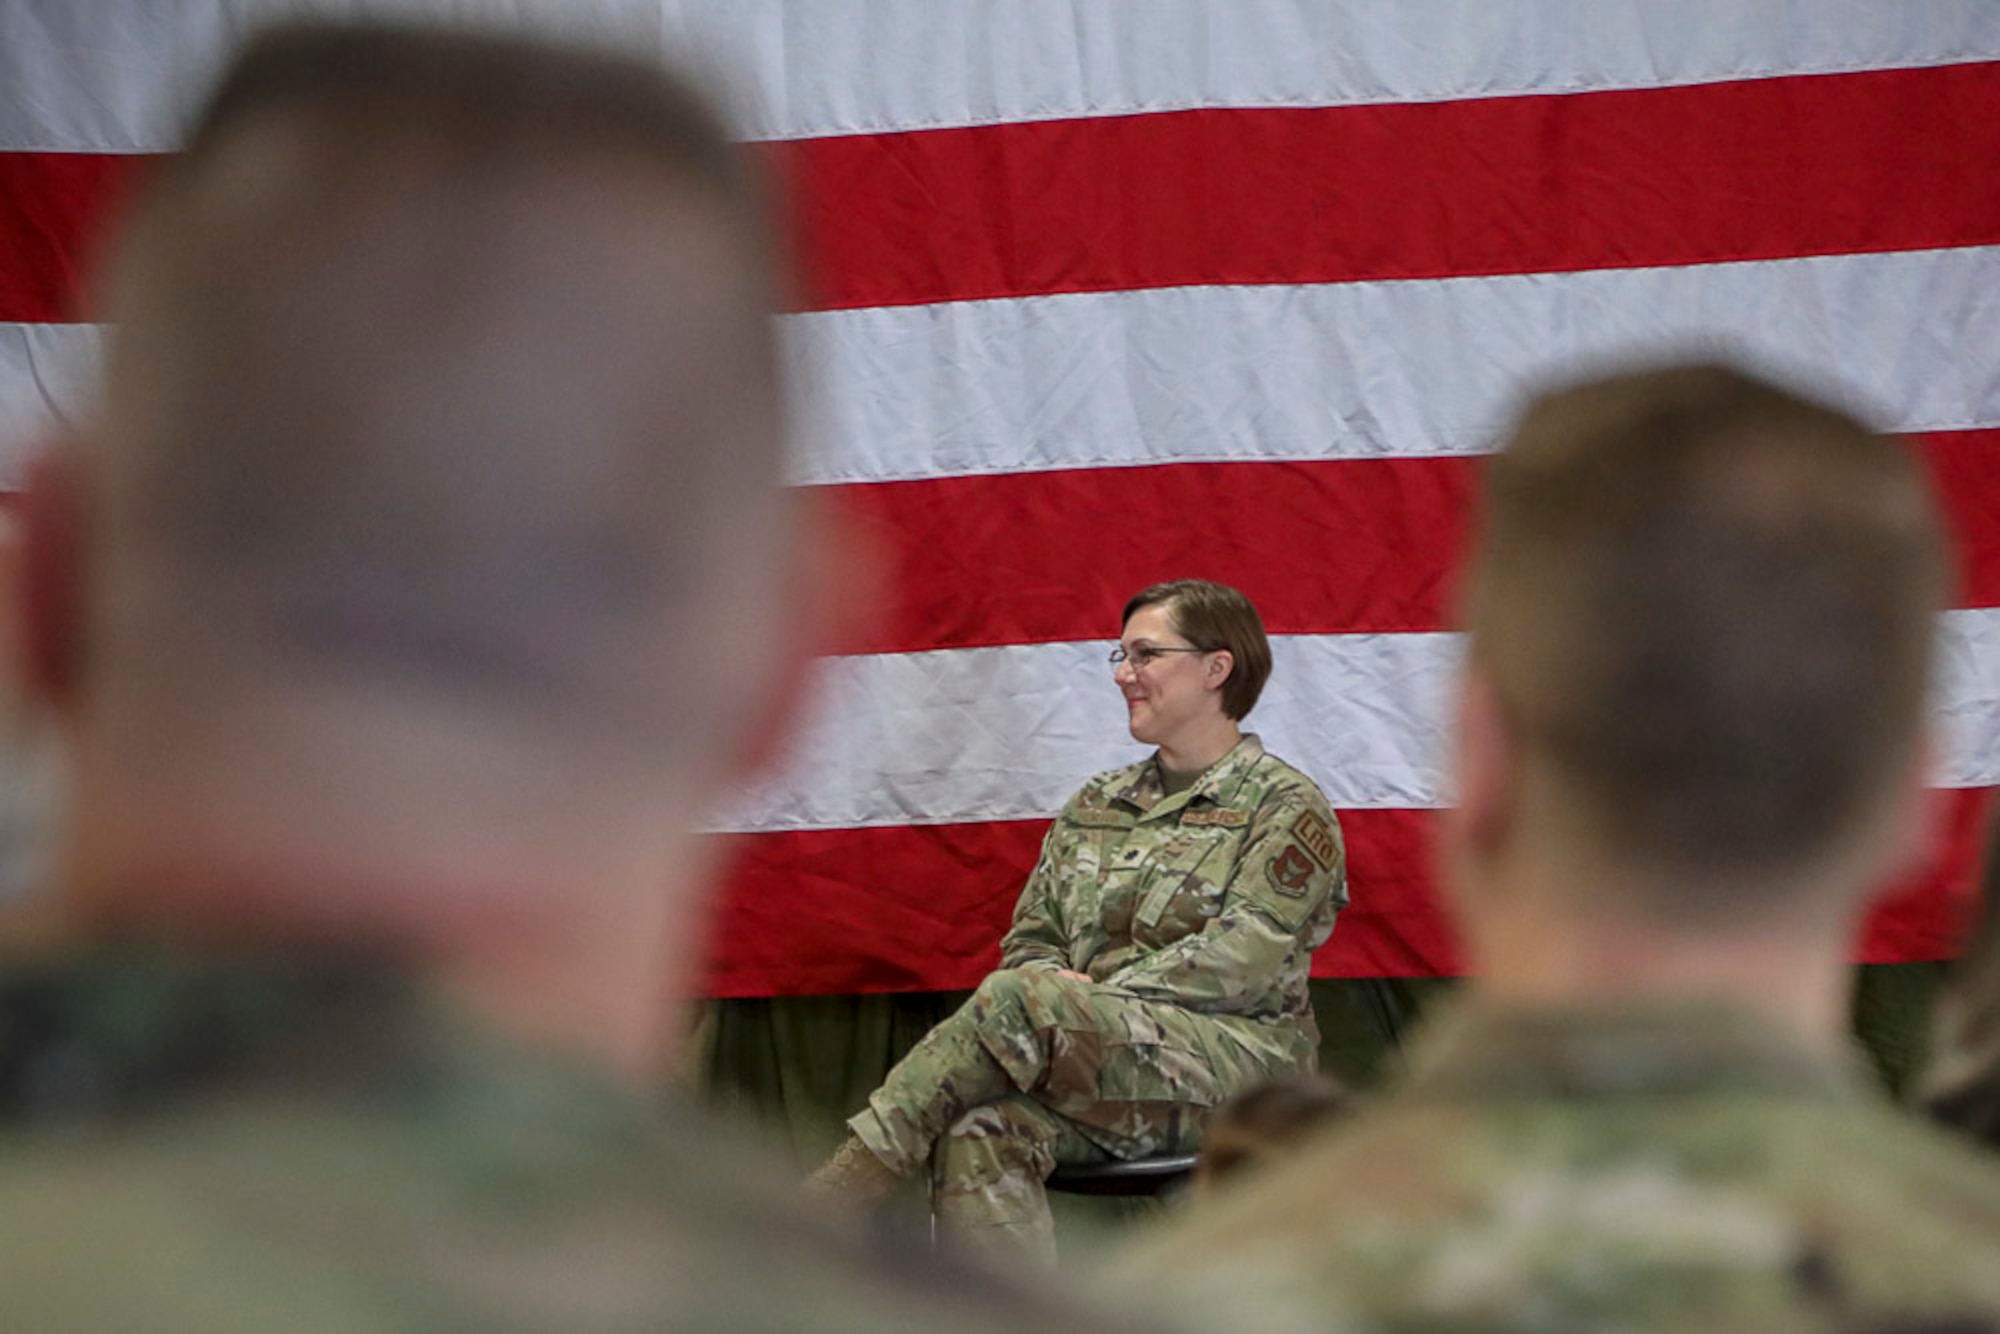 Lt. Col. Tara Horton smiles as she sits in operational camouflaged pattern uniform with the American flag draped behind her.